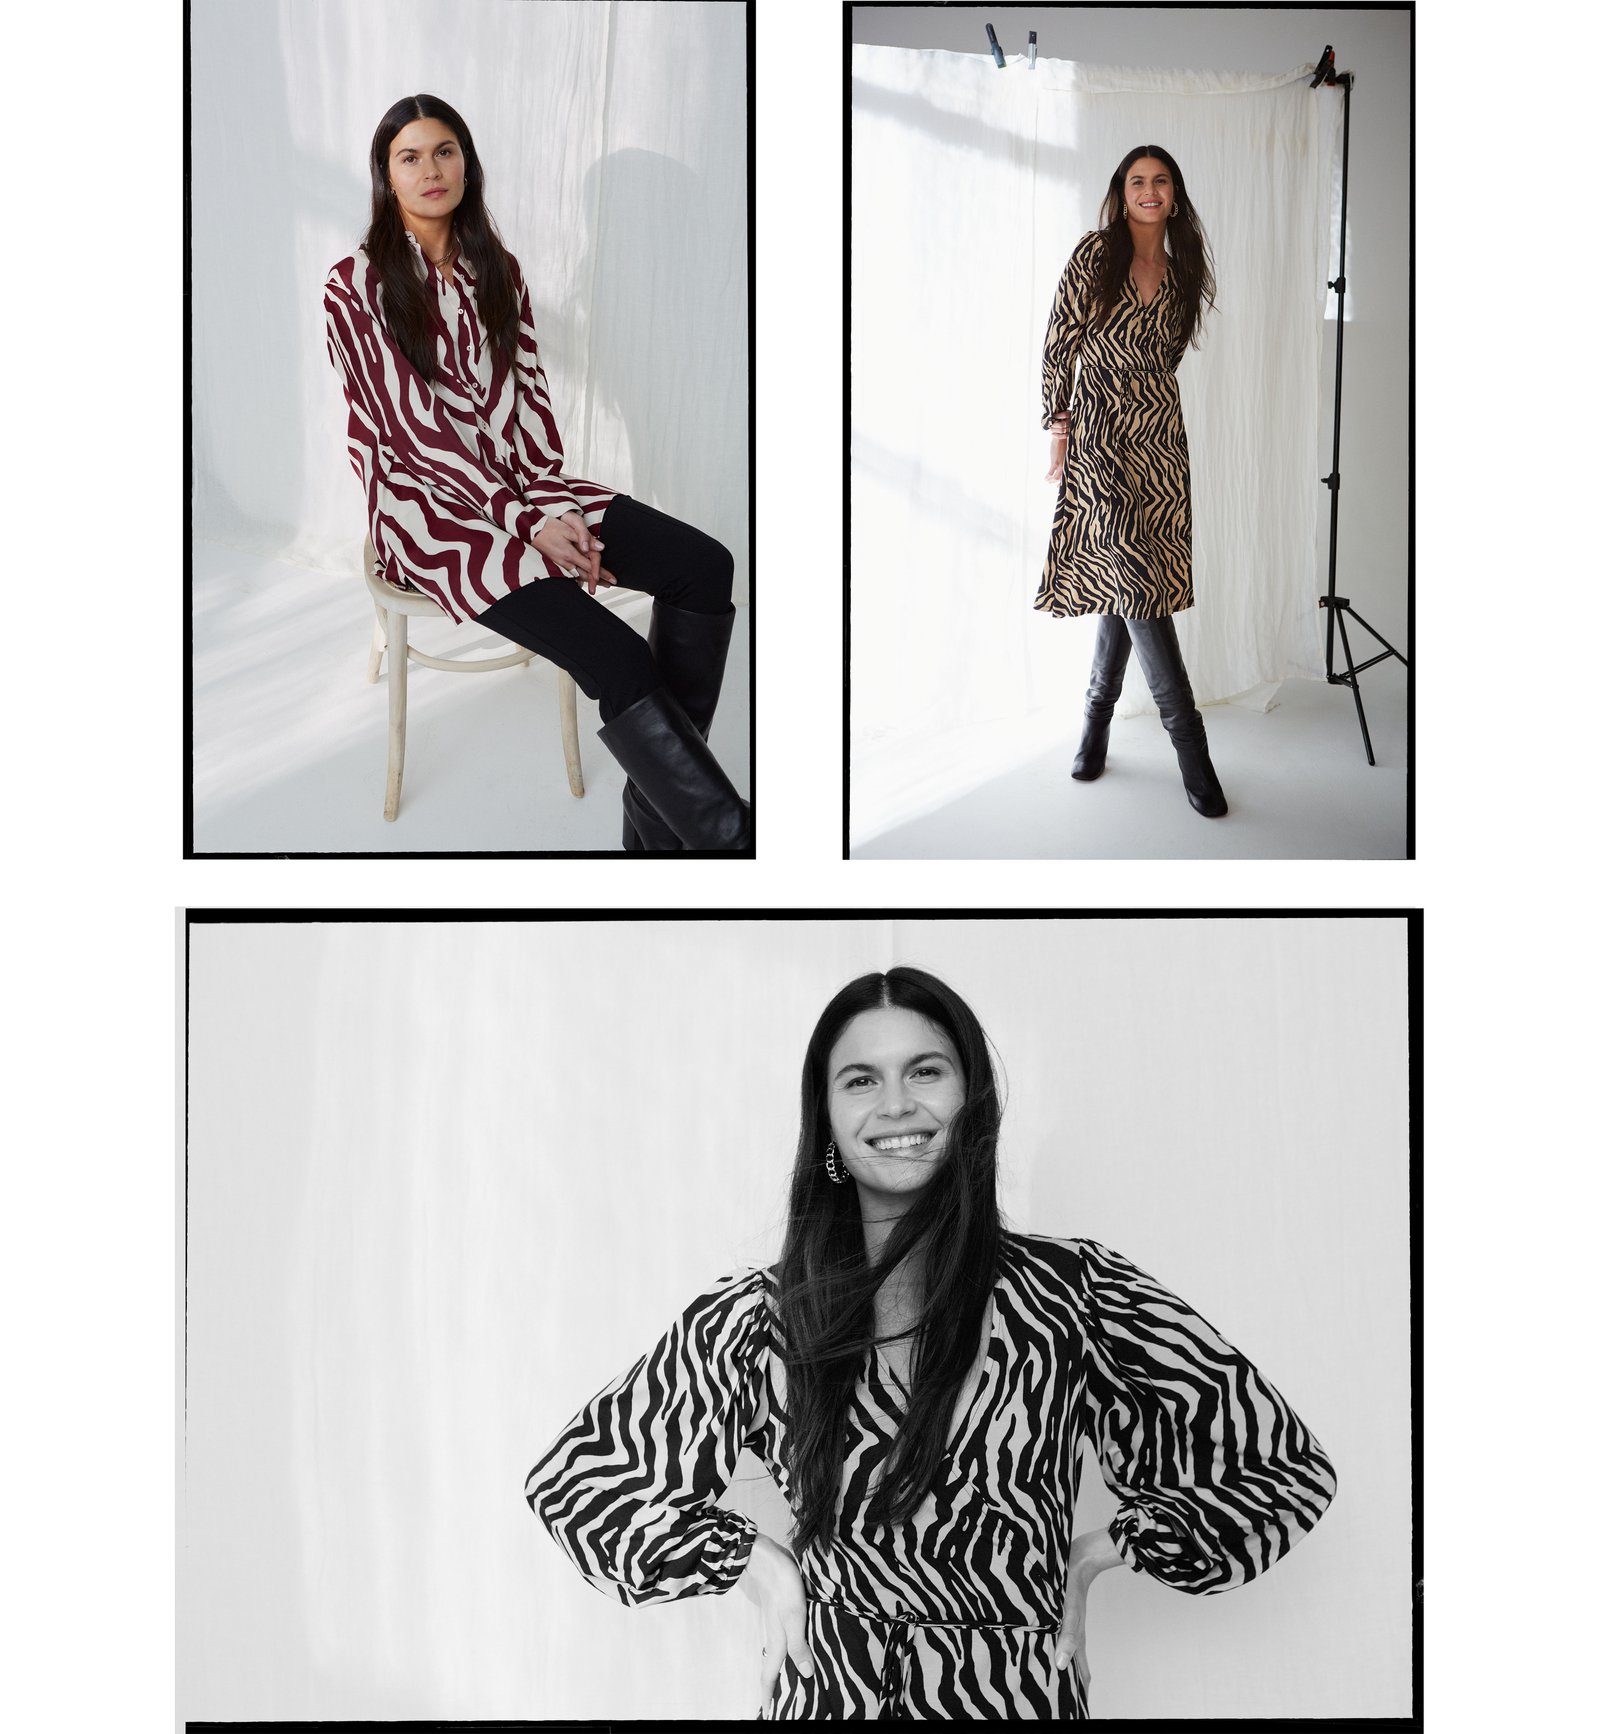 Collage of a woman with dark hair wearing three different outfits from Indiska. A zebra pattern dress called Ziggy dress, a jersey zebra patterned dress called Senja and a zebra pattern shirt called Chris with wide pants. 